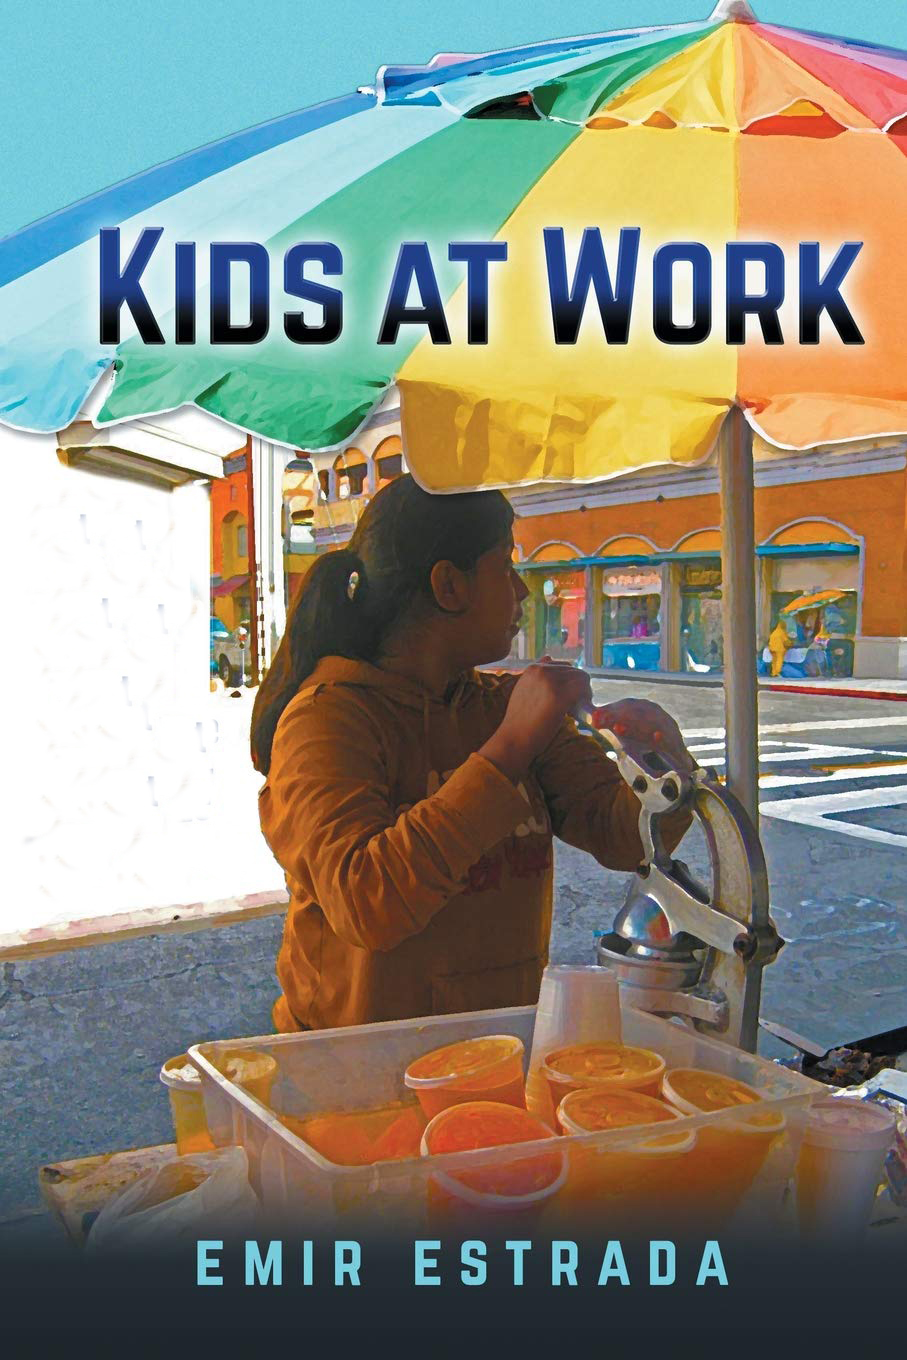 Cover of "Kids at Work" by Emir Estrada